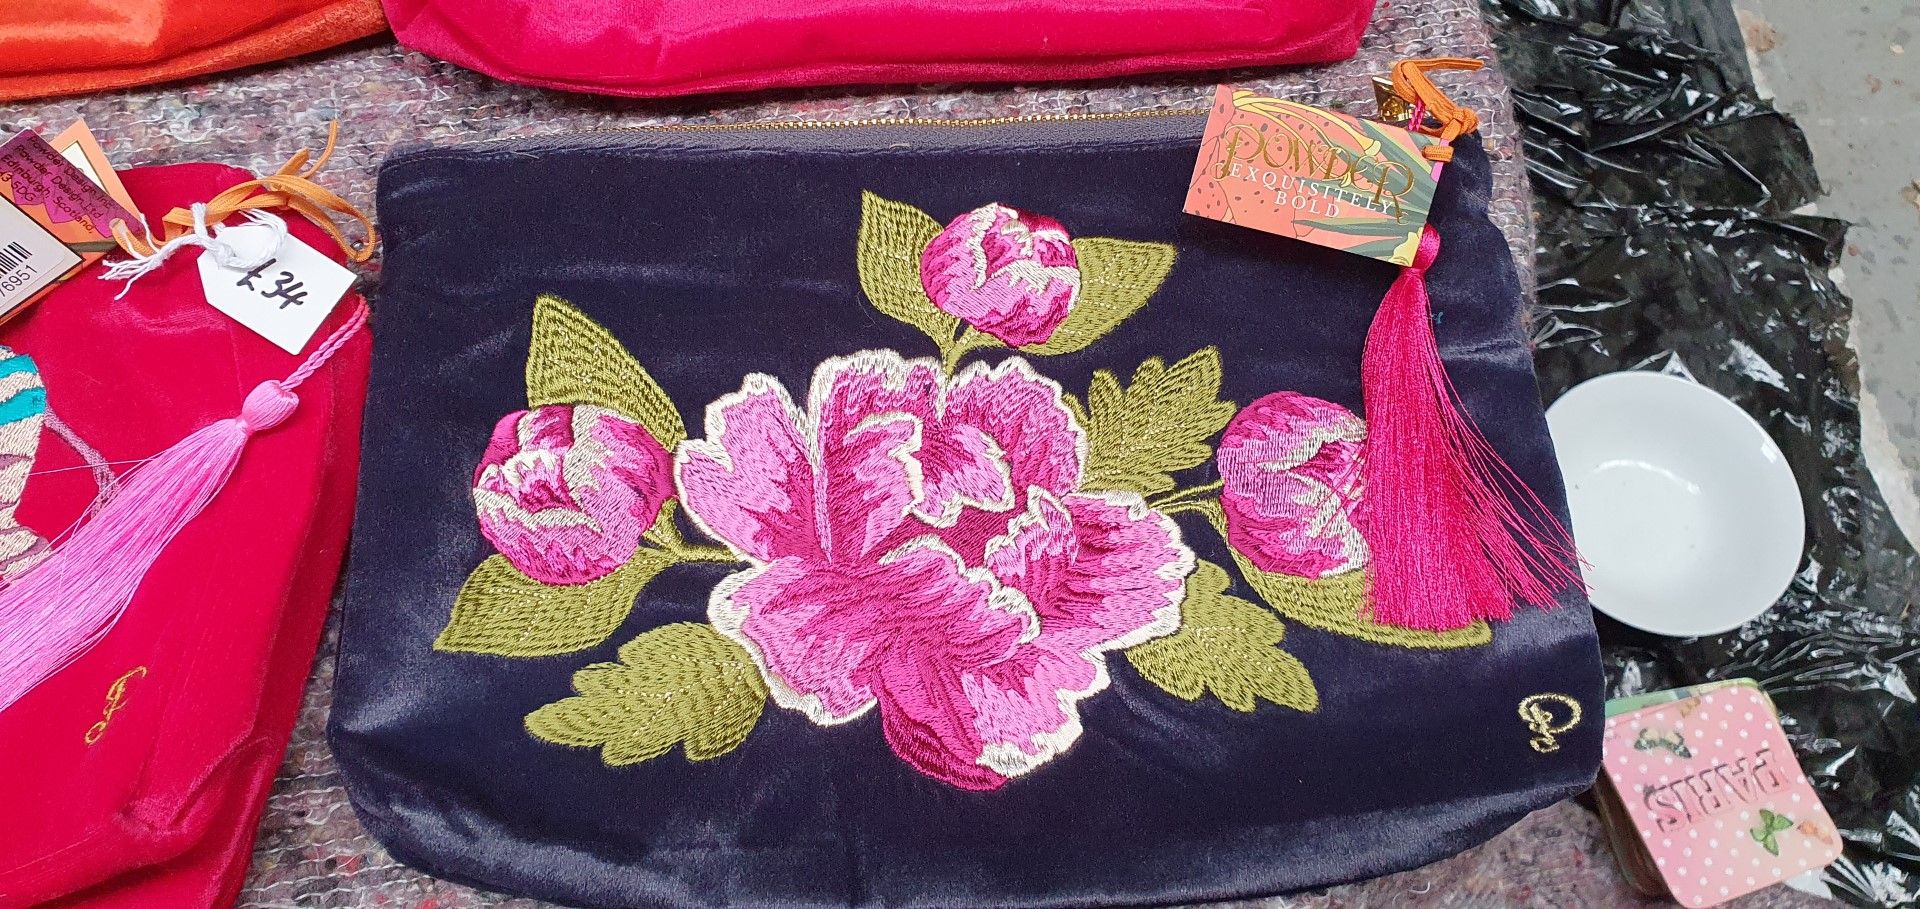 4 x Toiletries Bags By Powder Featuring a Velvet Material and Animal / Floral Stitched Designs - New - Image 3 of 5